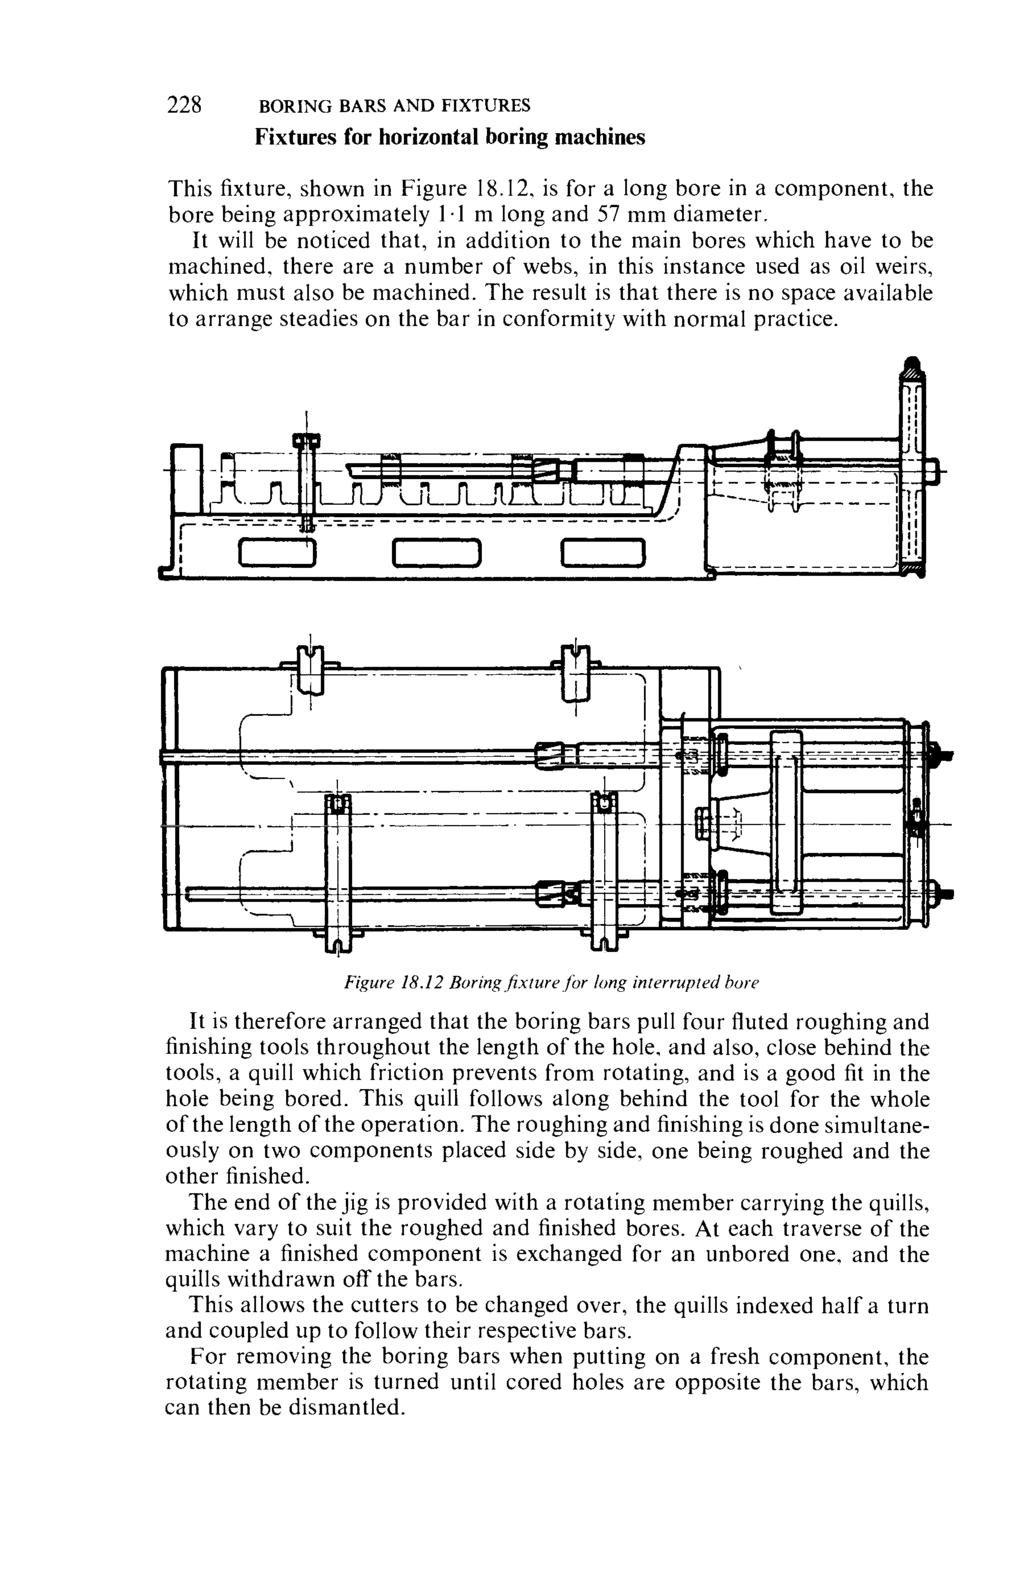 228 BORING BARS AND FIXTURES Fixtures for horizontal boring machines This fixture, shown in Figure 18.12, is for a long bore in a component, the bore being approximately 11 m long and 57 mm diameter.